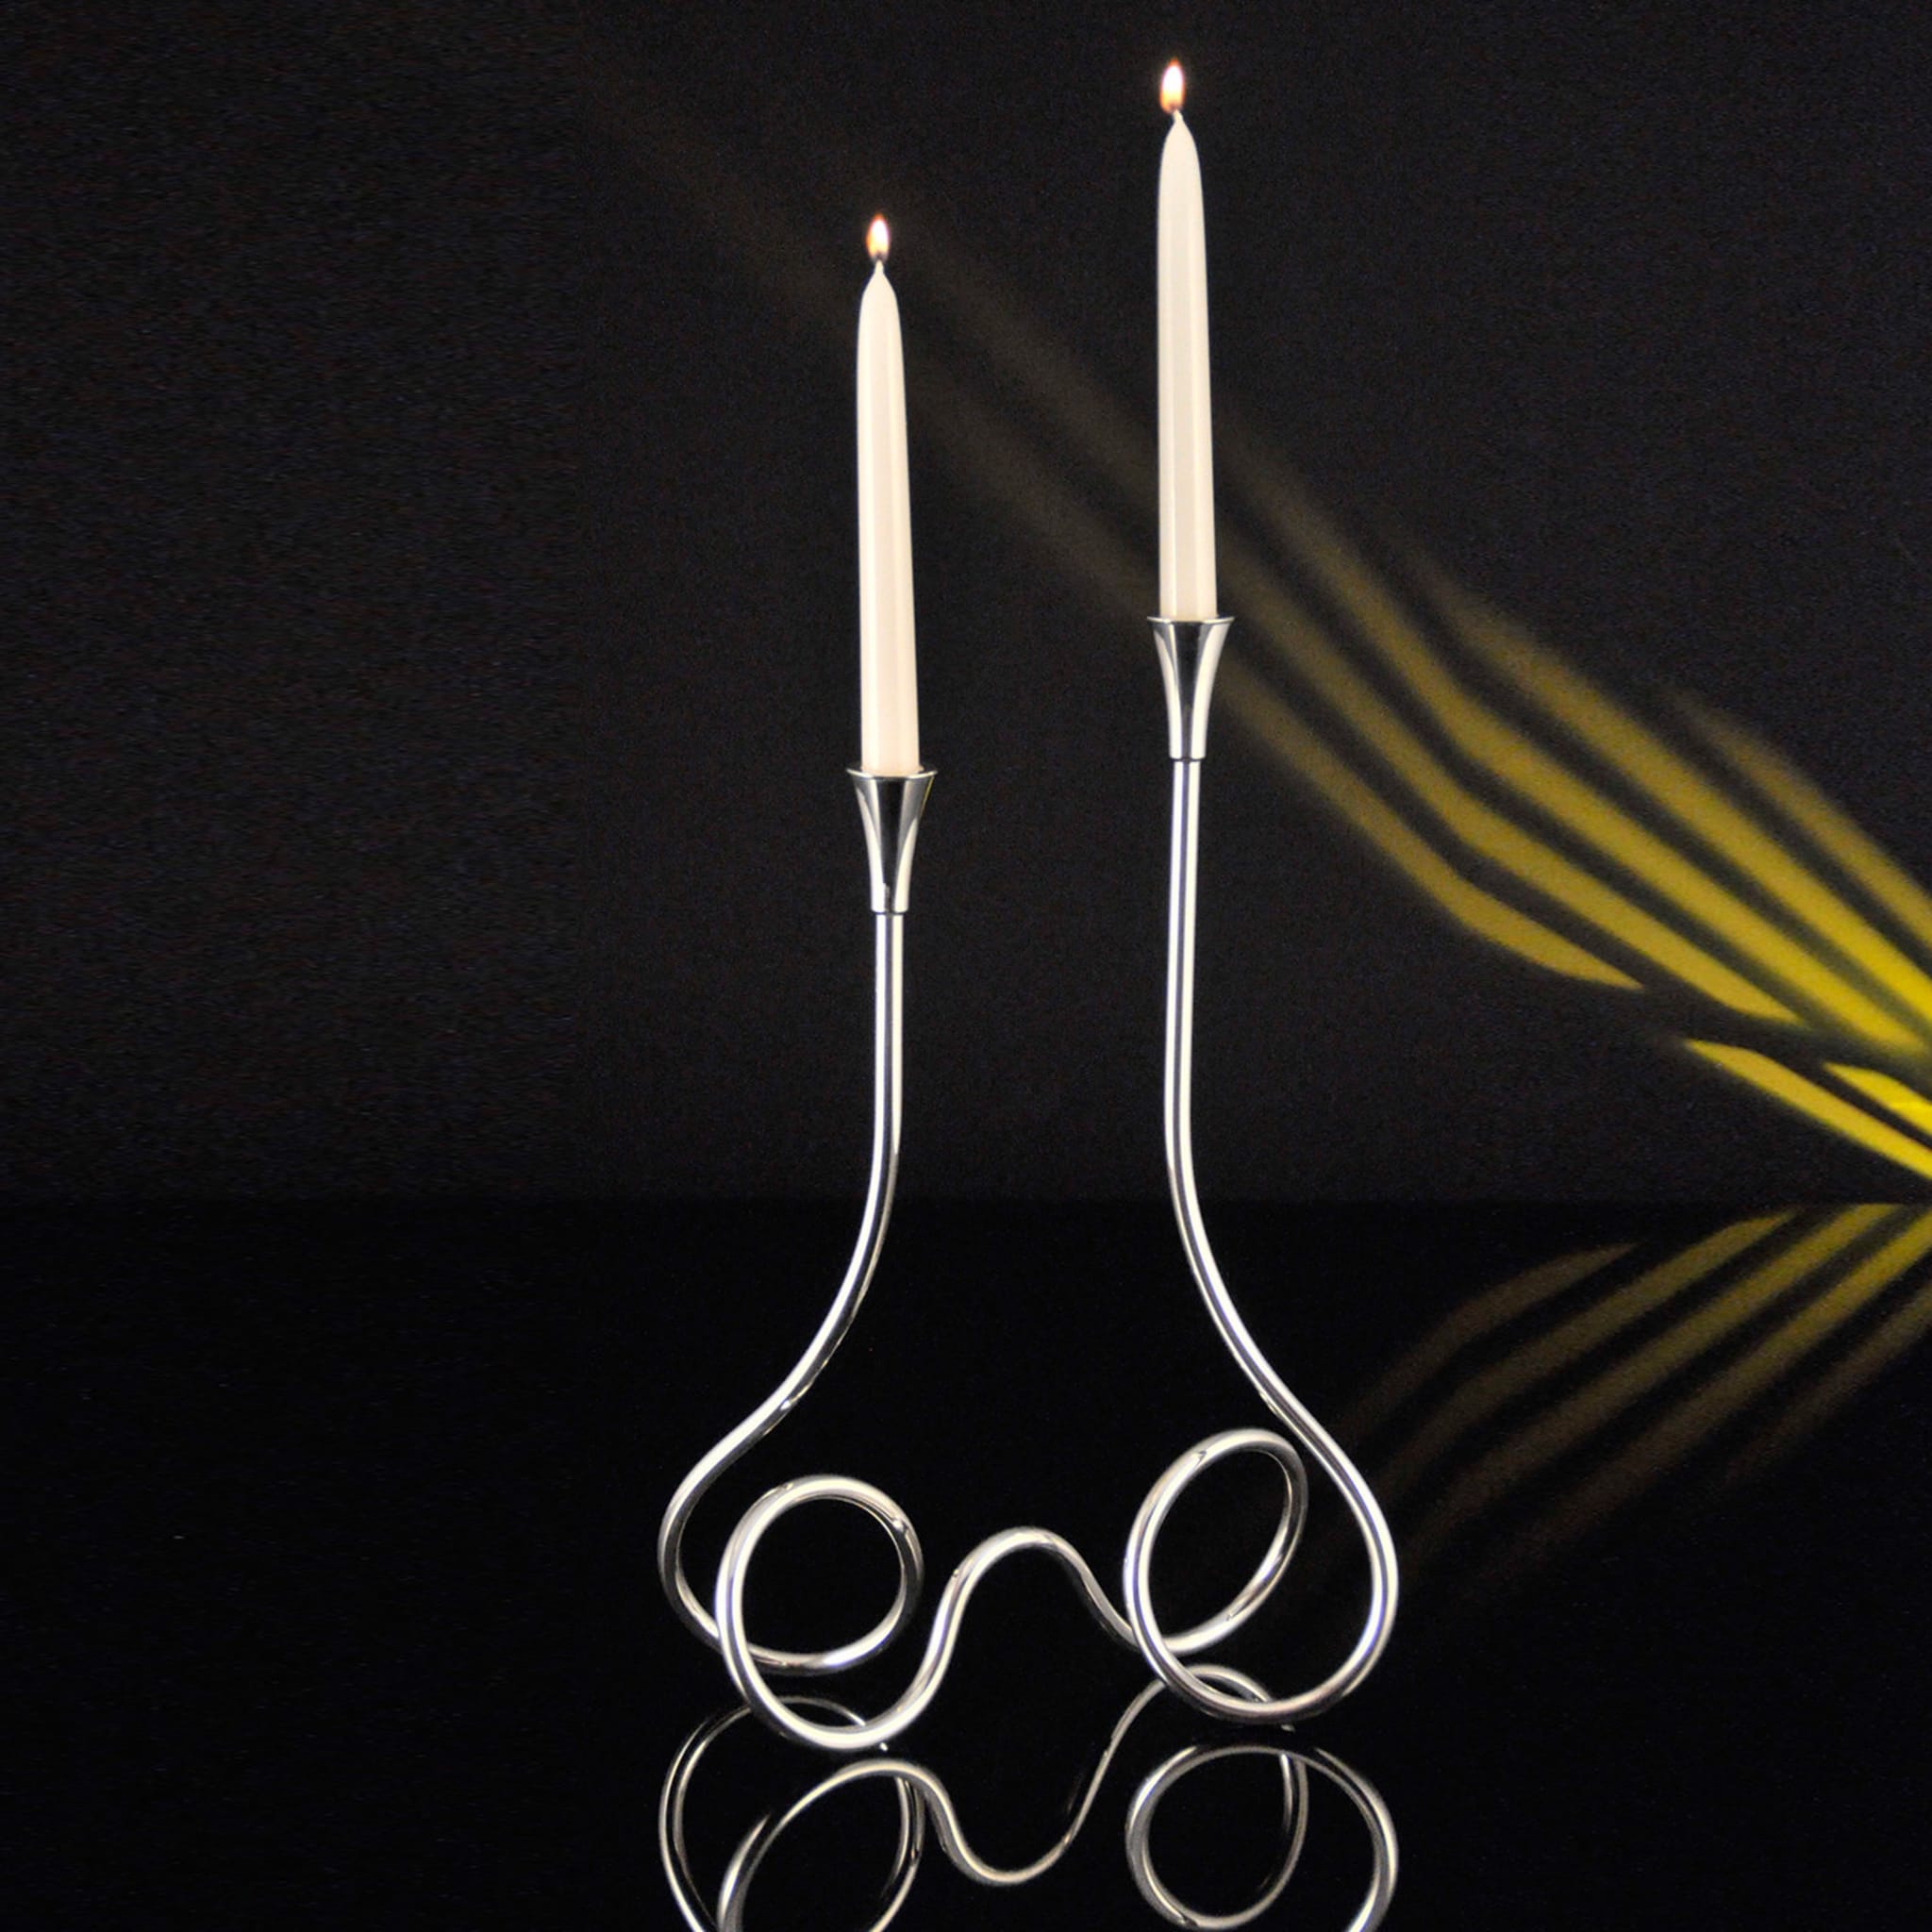 Naima Two-Flame Candle Holder - Alternative view 1